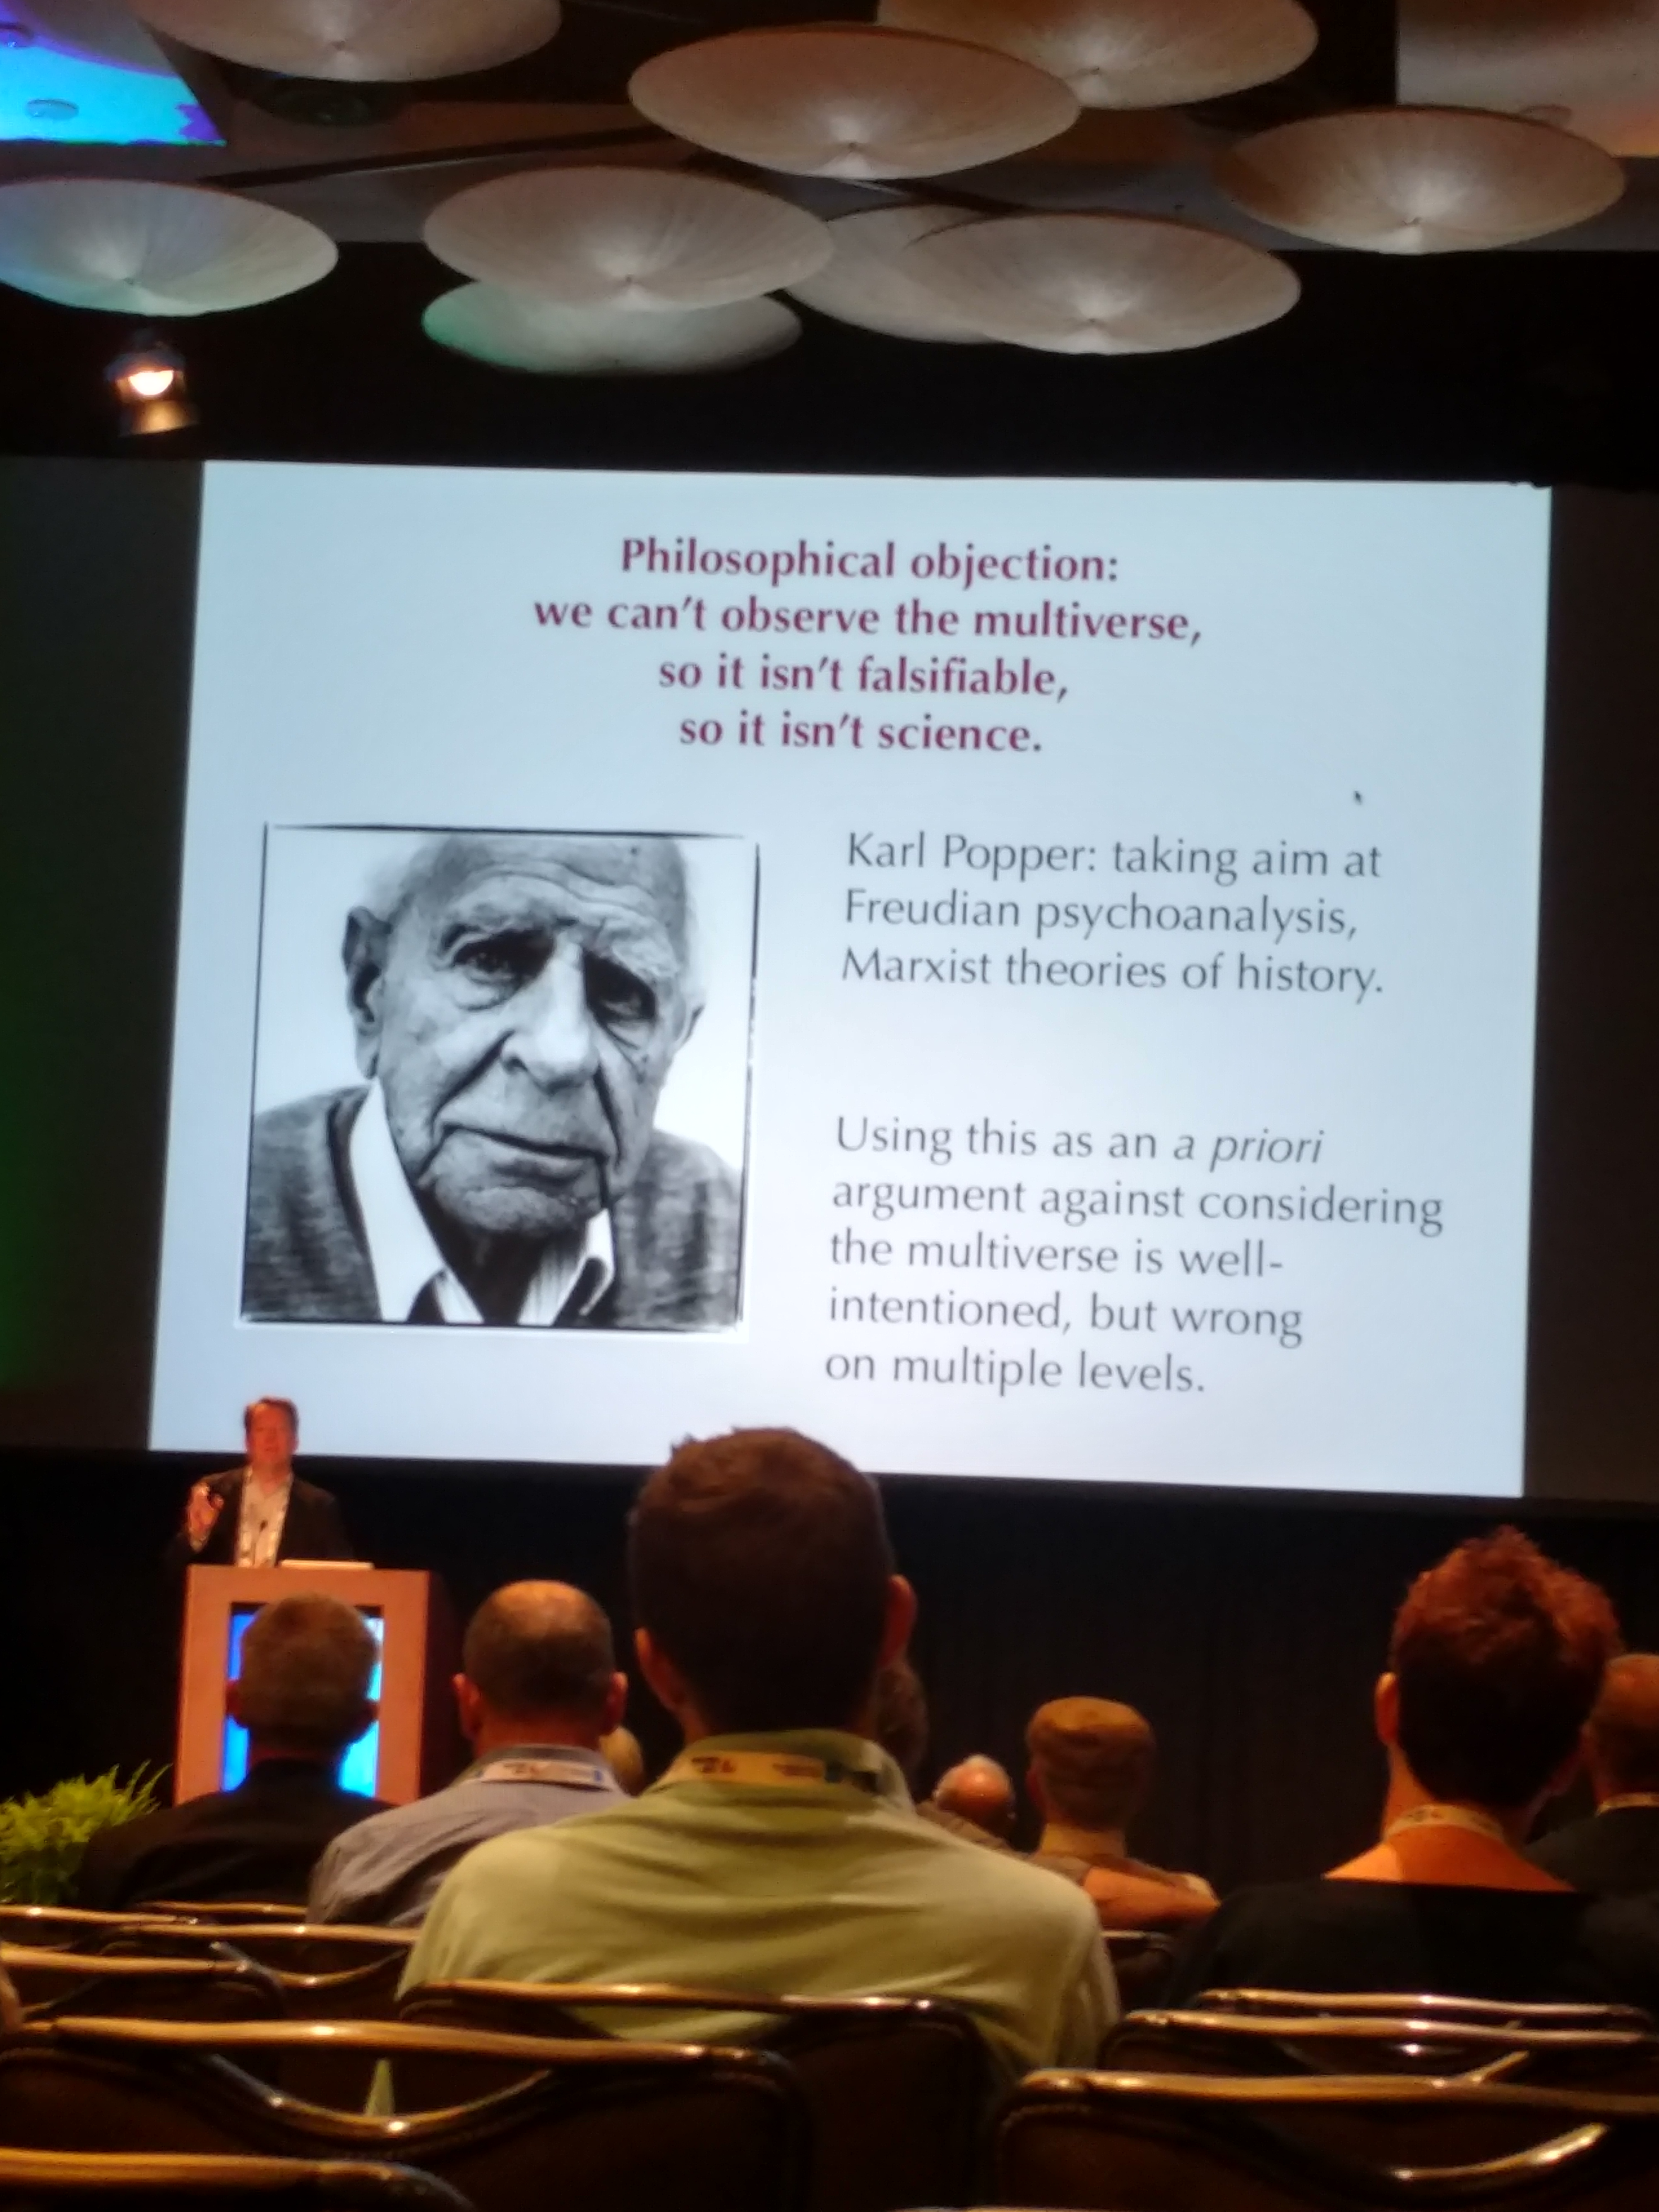 Karl Popper was everywhere today, being invoked by both Matt Stanley and Sean Carroll.